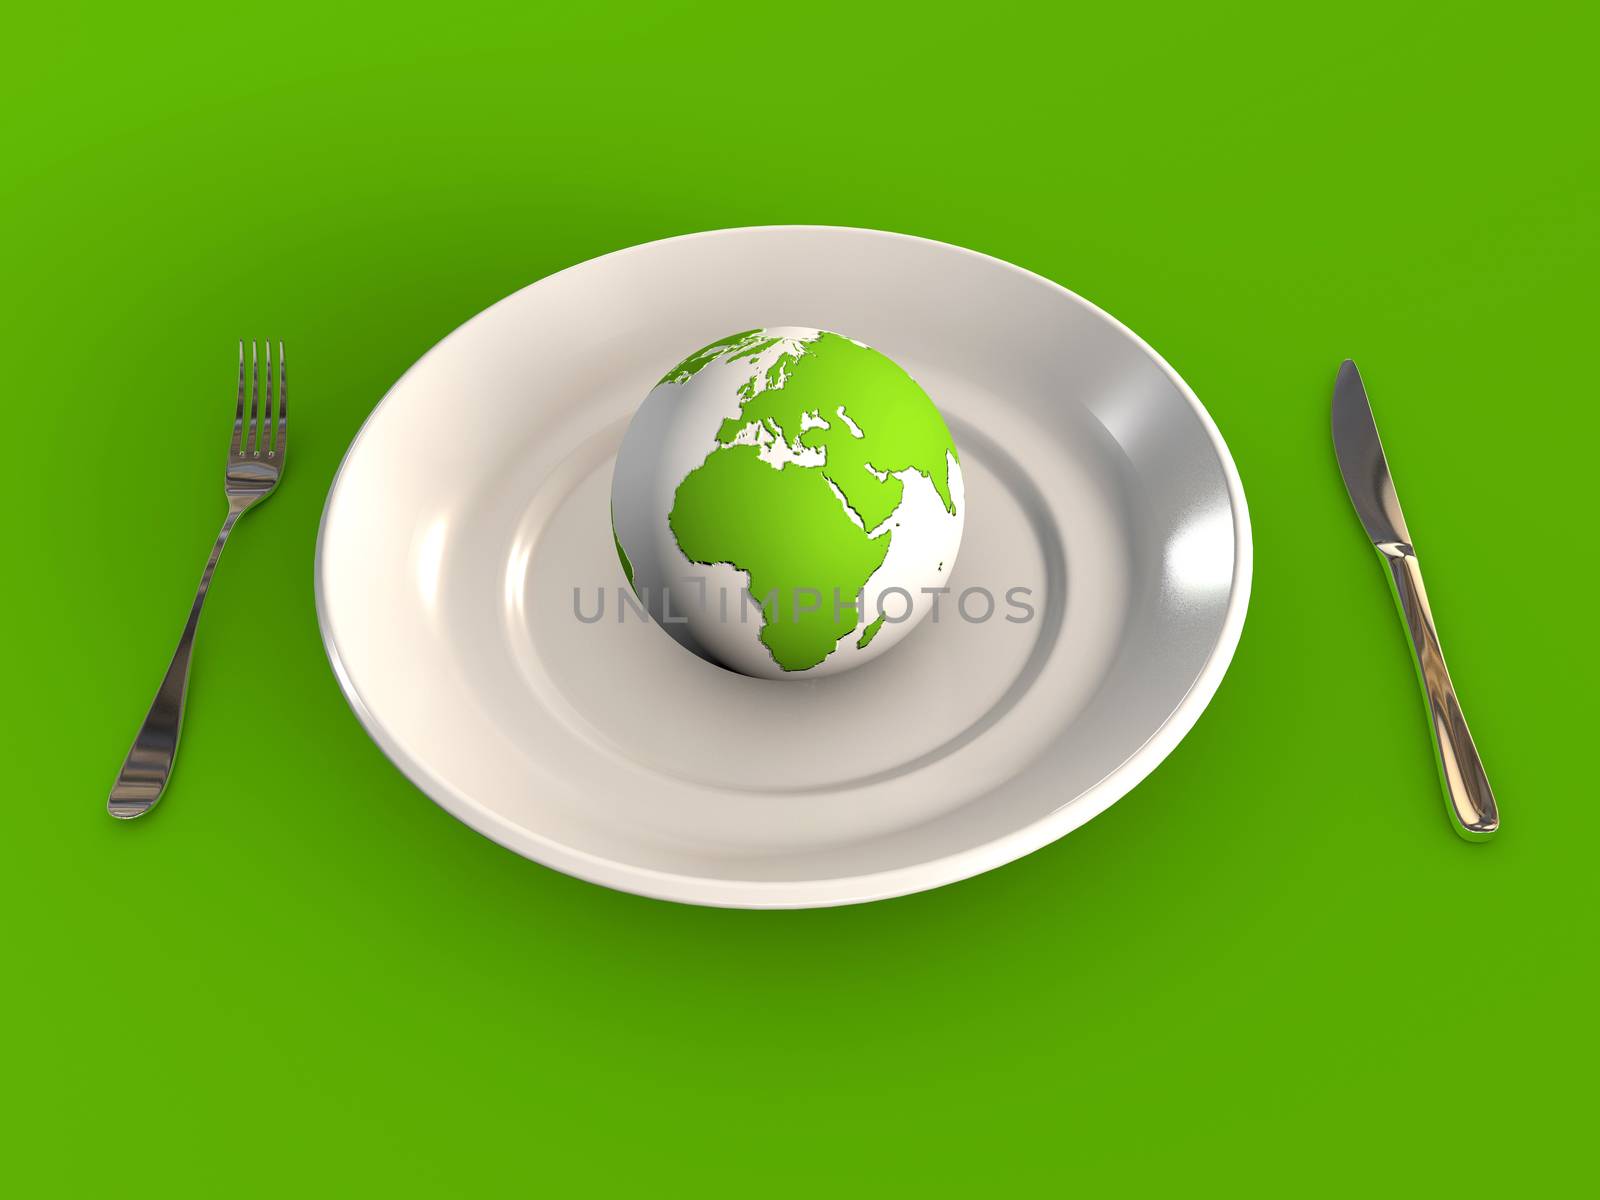 Food industry and planet Earth 3D rendered concept by F1b0nacci